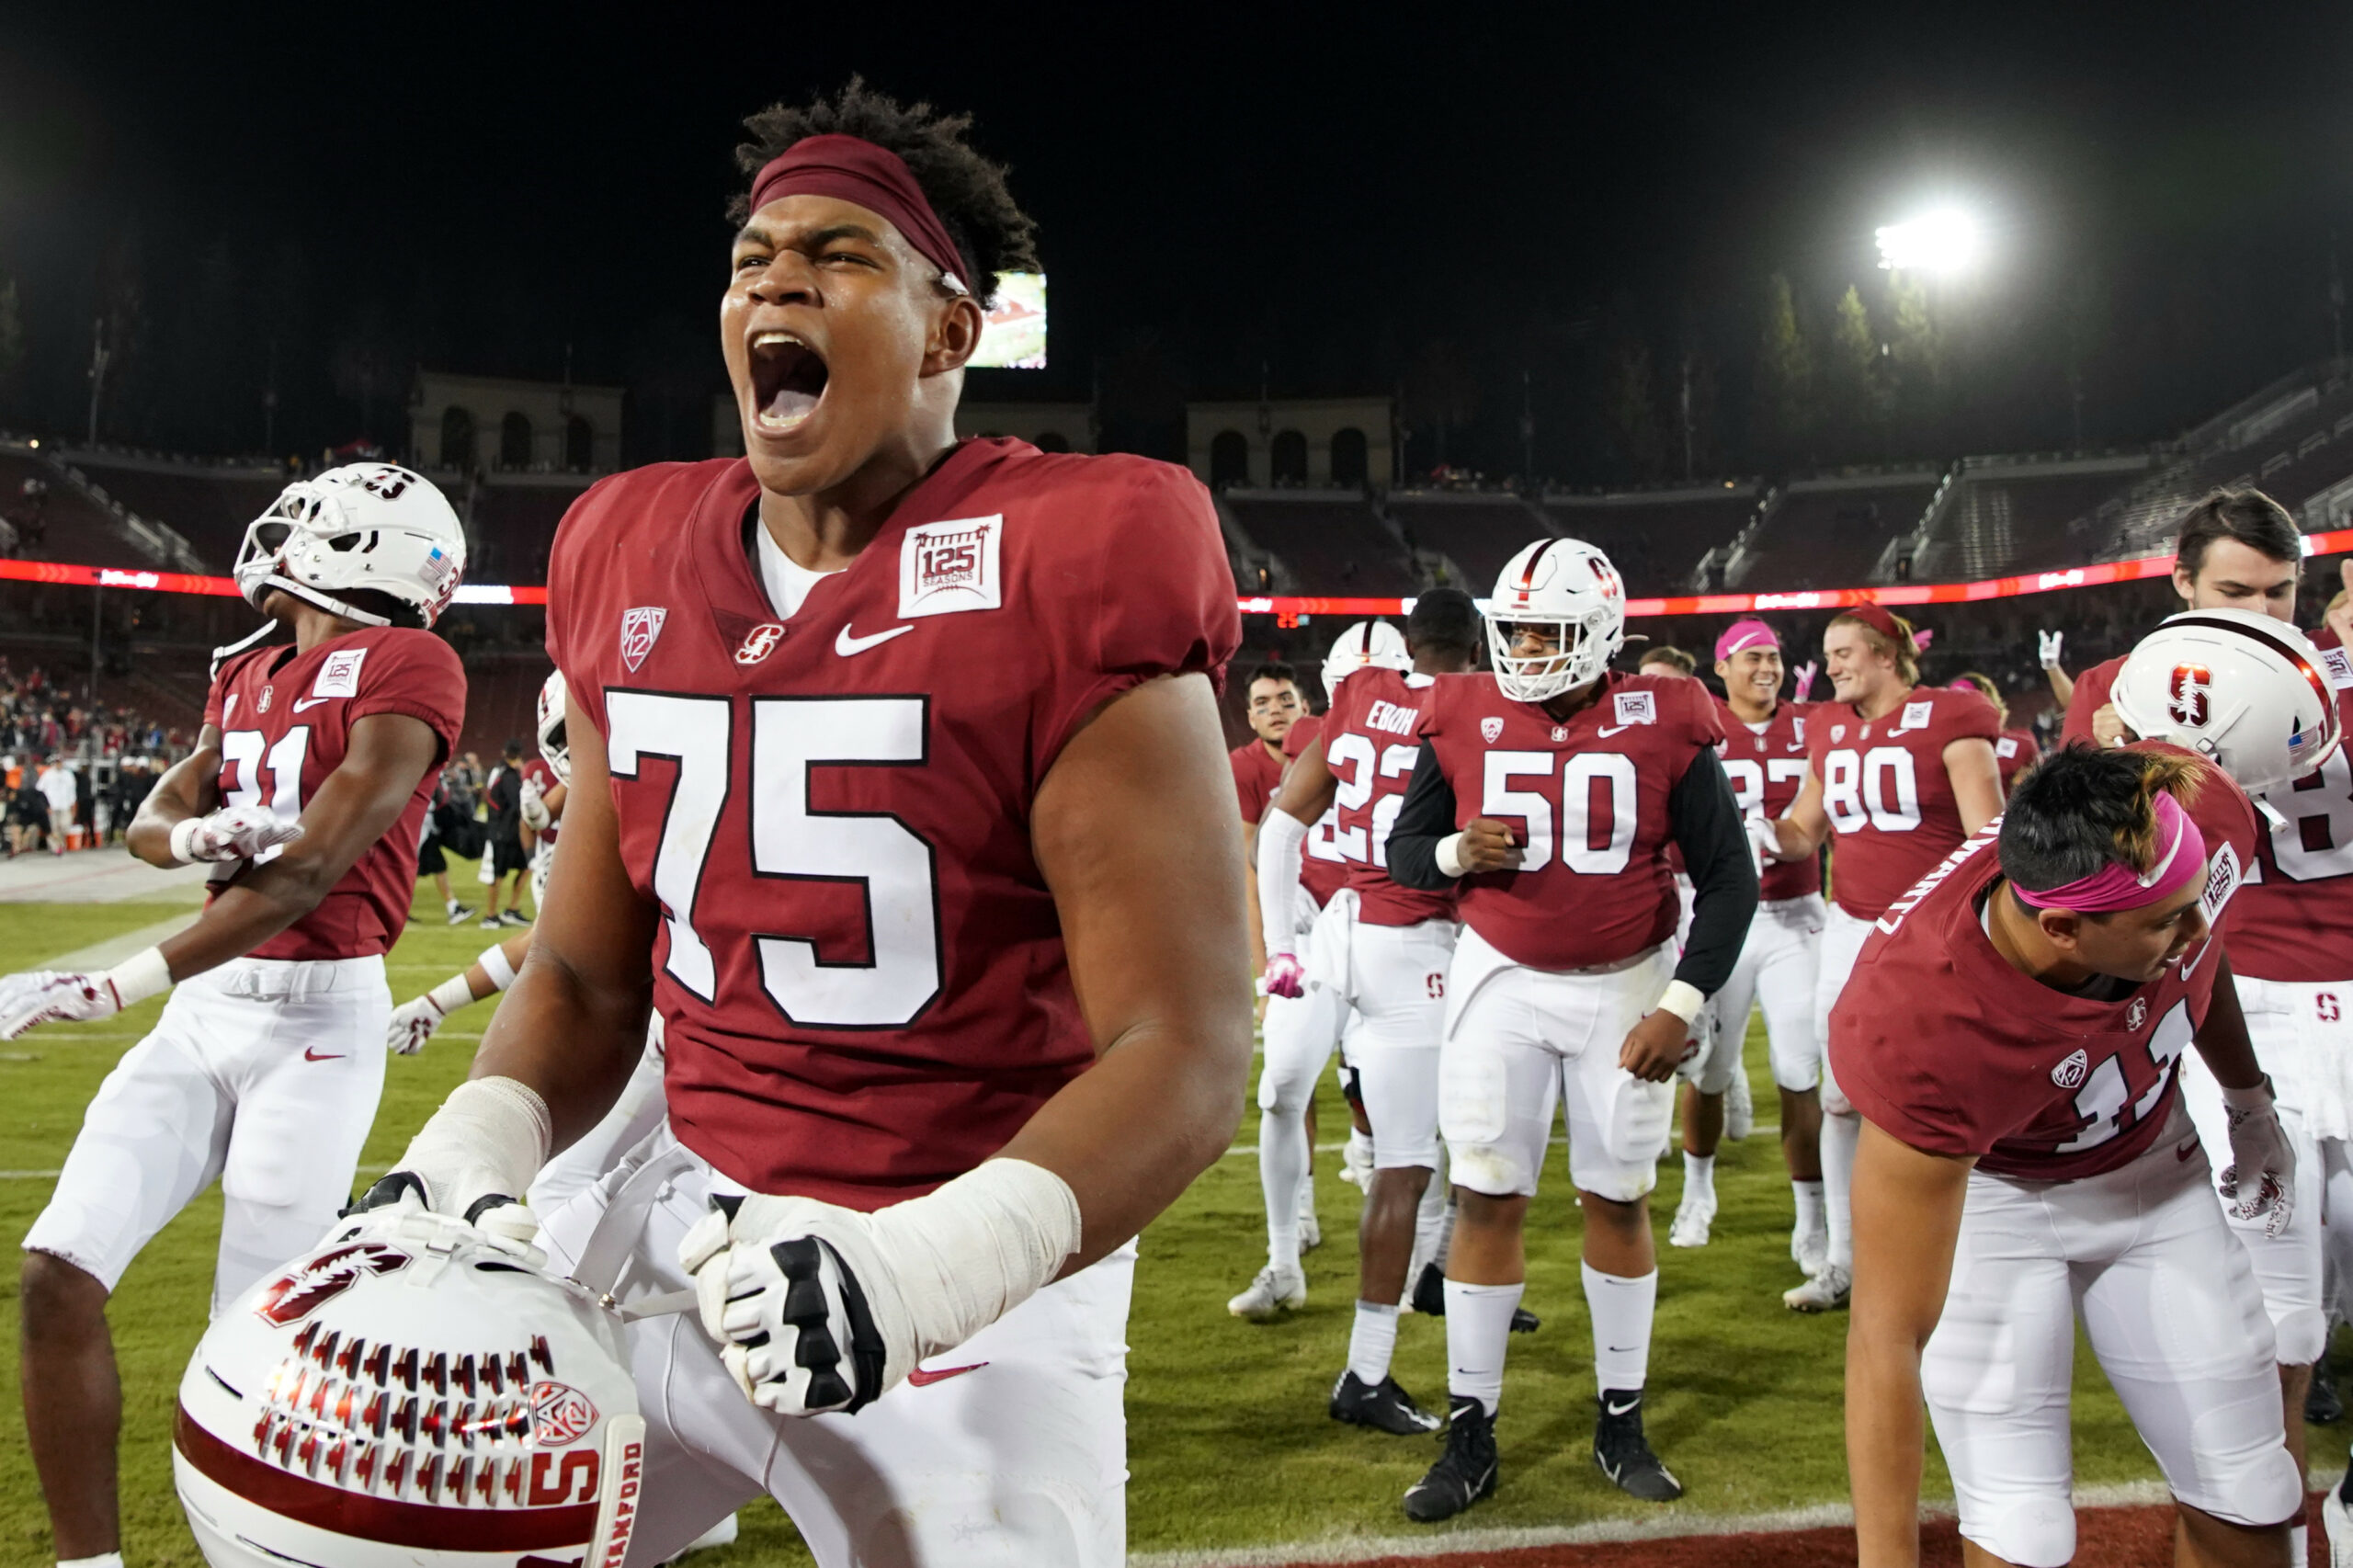 Stanford transfer offensive tackle Walter Rouse to visit with Oklahoma